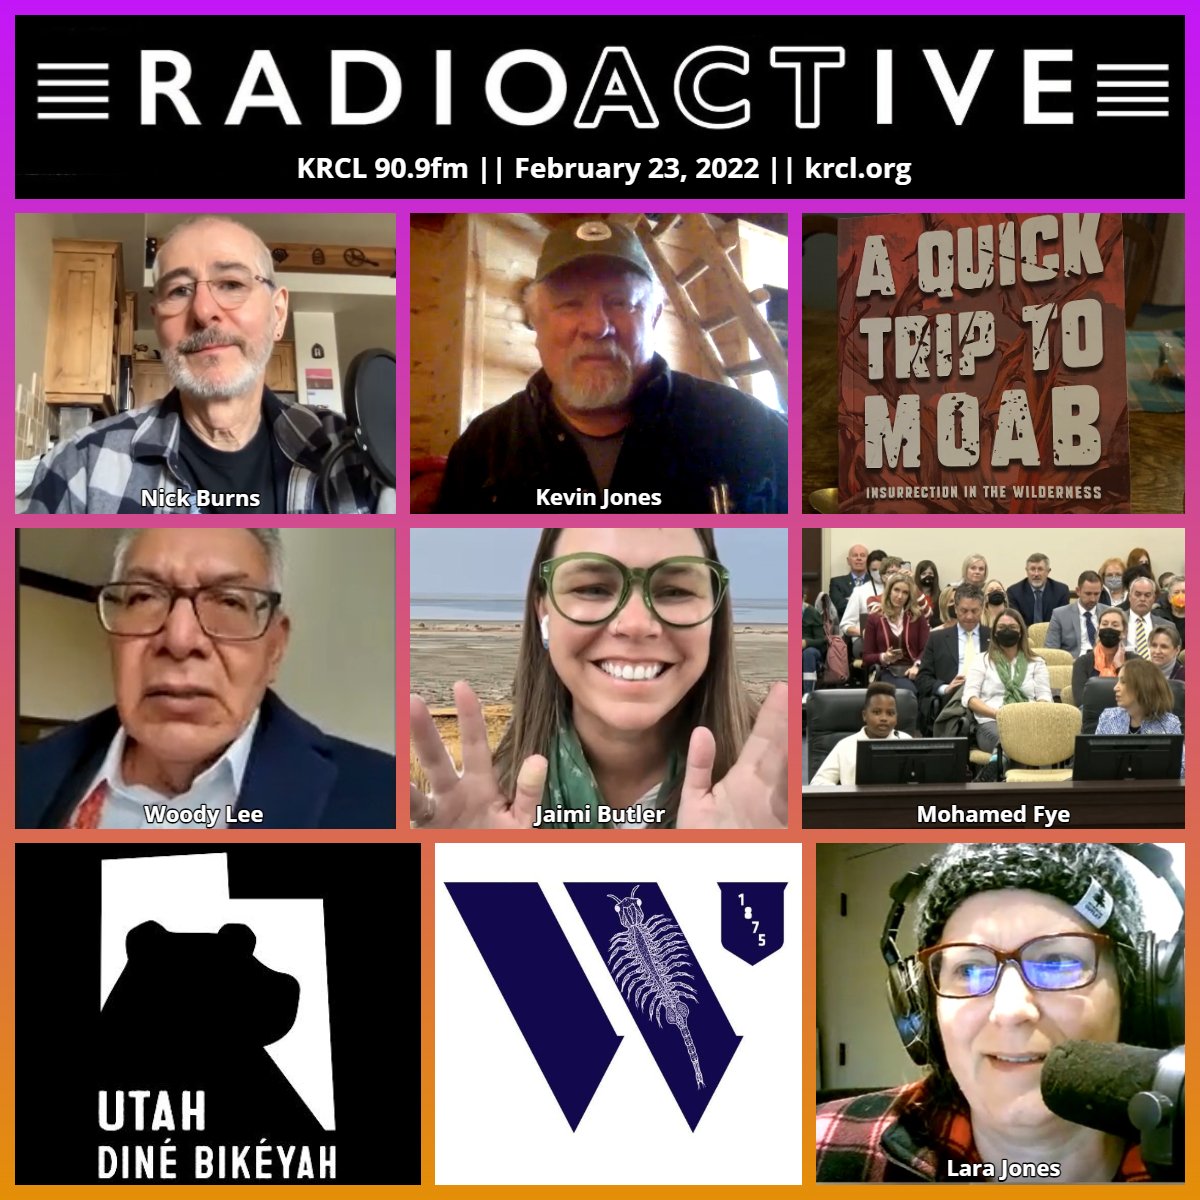 KRCL's RadioACTive guests for 2/23/22